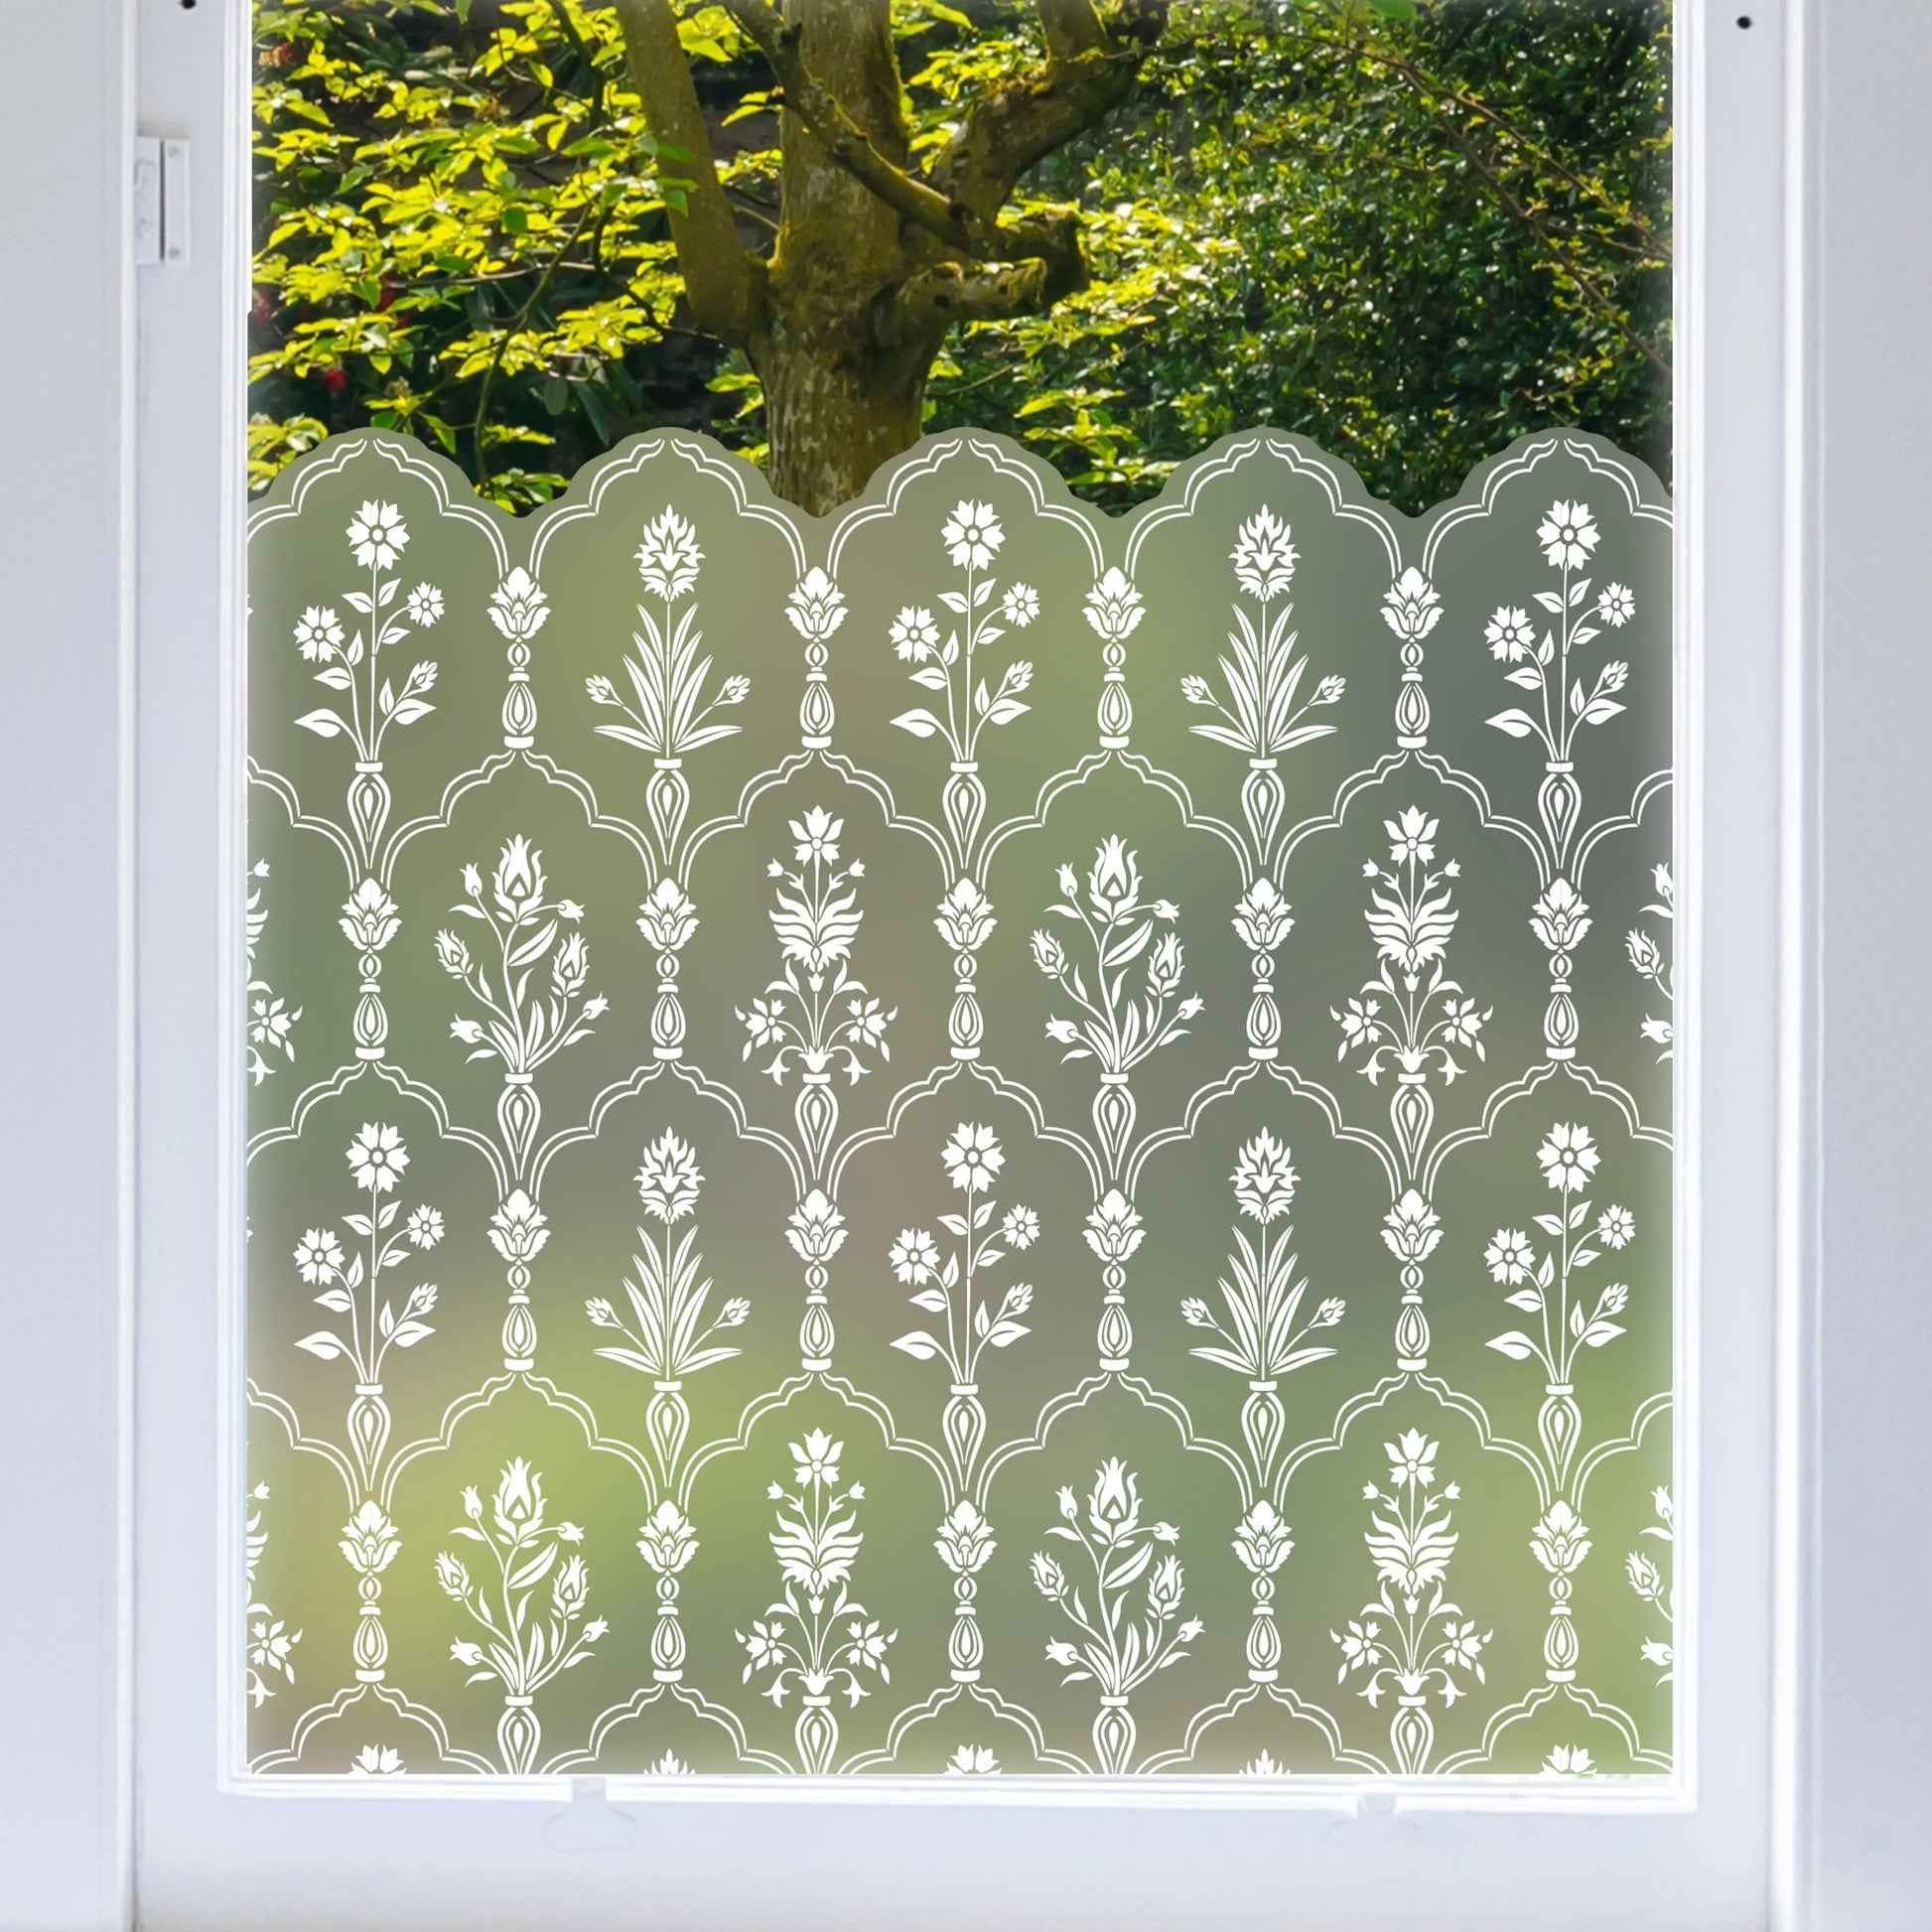 Privacy Window Hamedan Frosted Window Privacy Border Dizzy Duck Designs